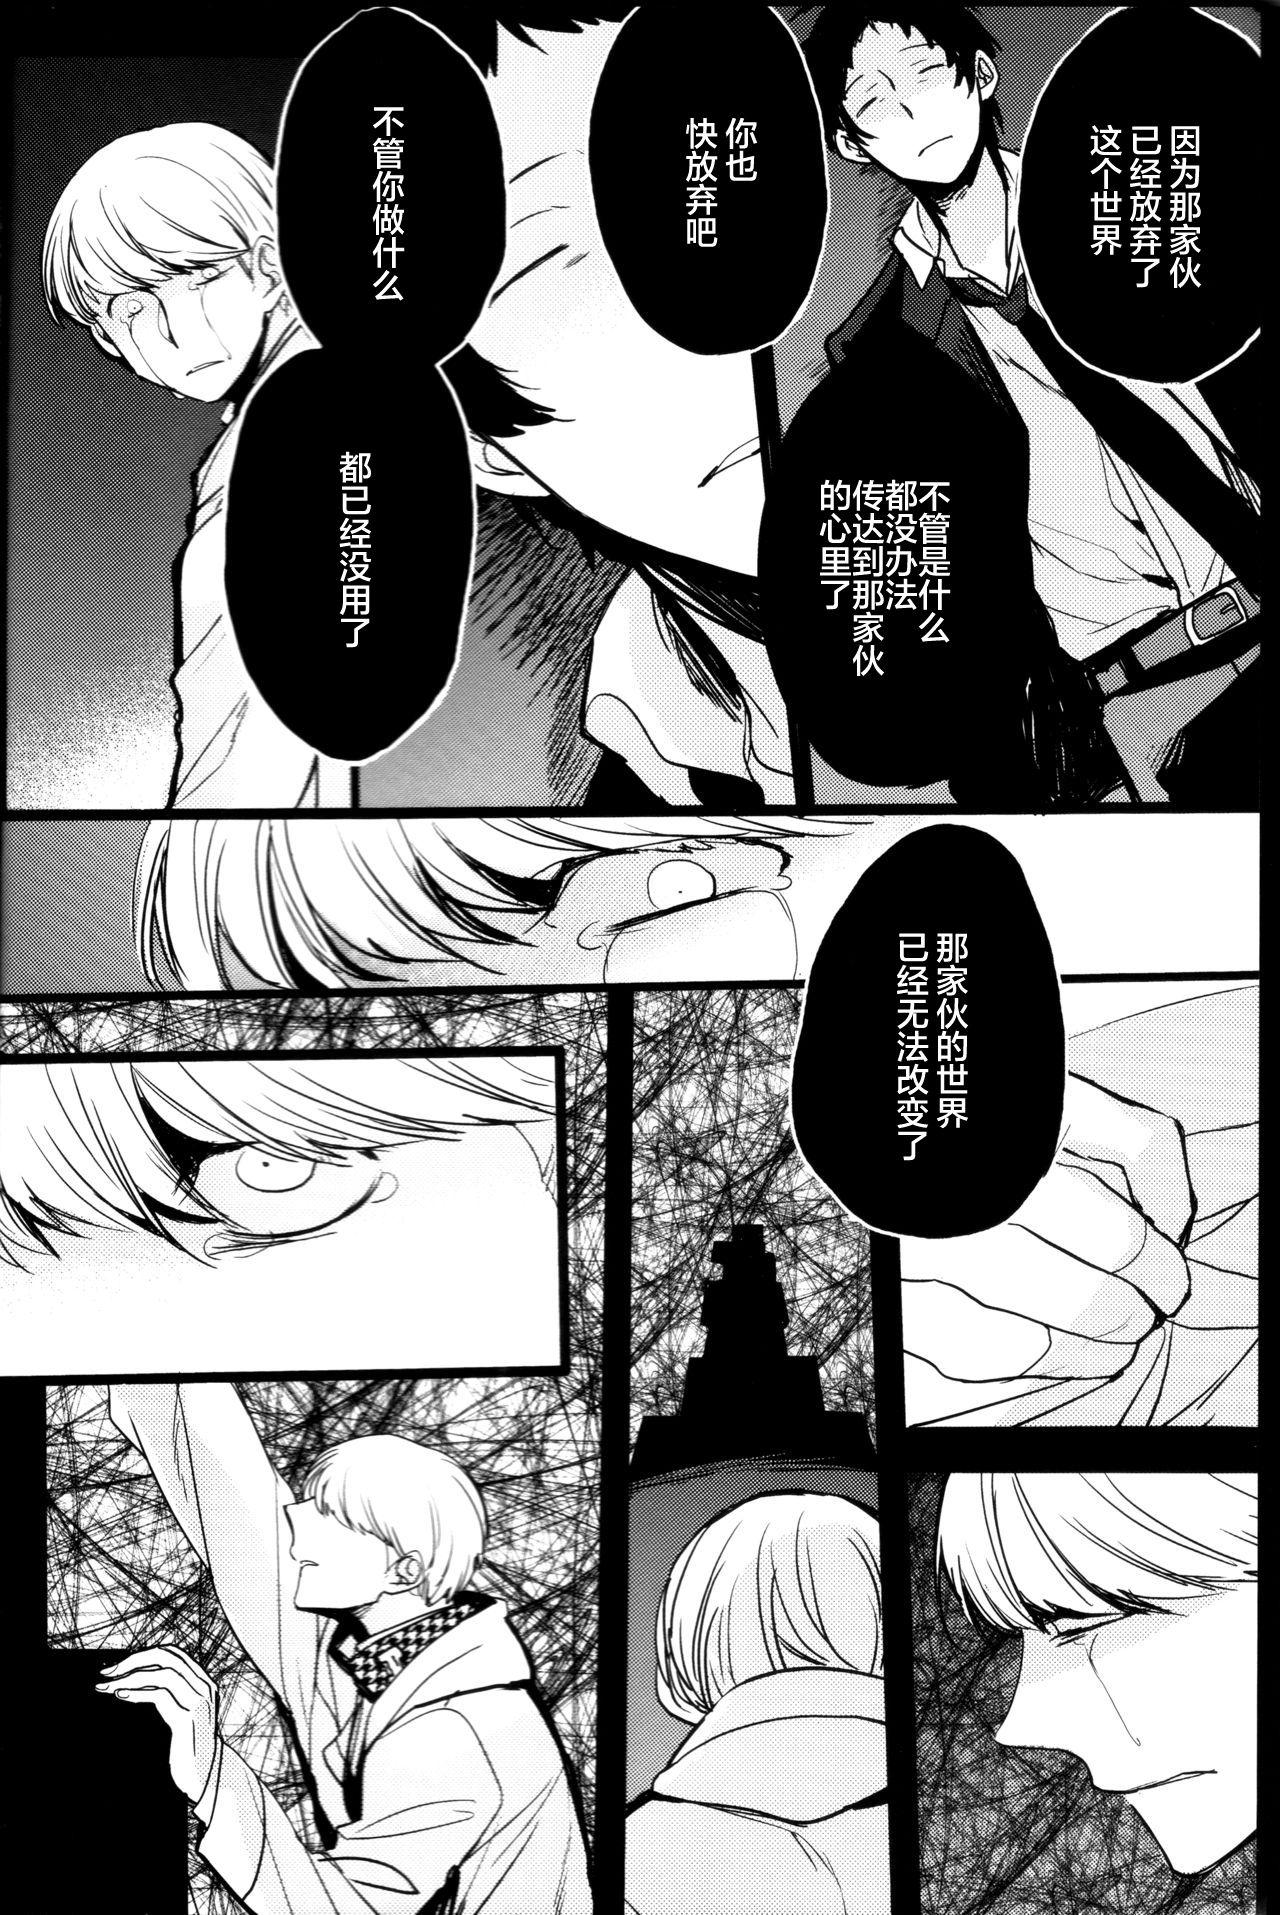 Blowjobs The End Of The World Volume 3 - Persona 4 Gemendo - Page 8